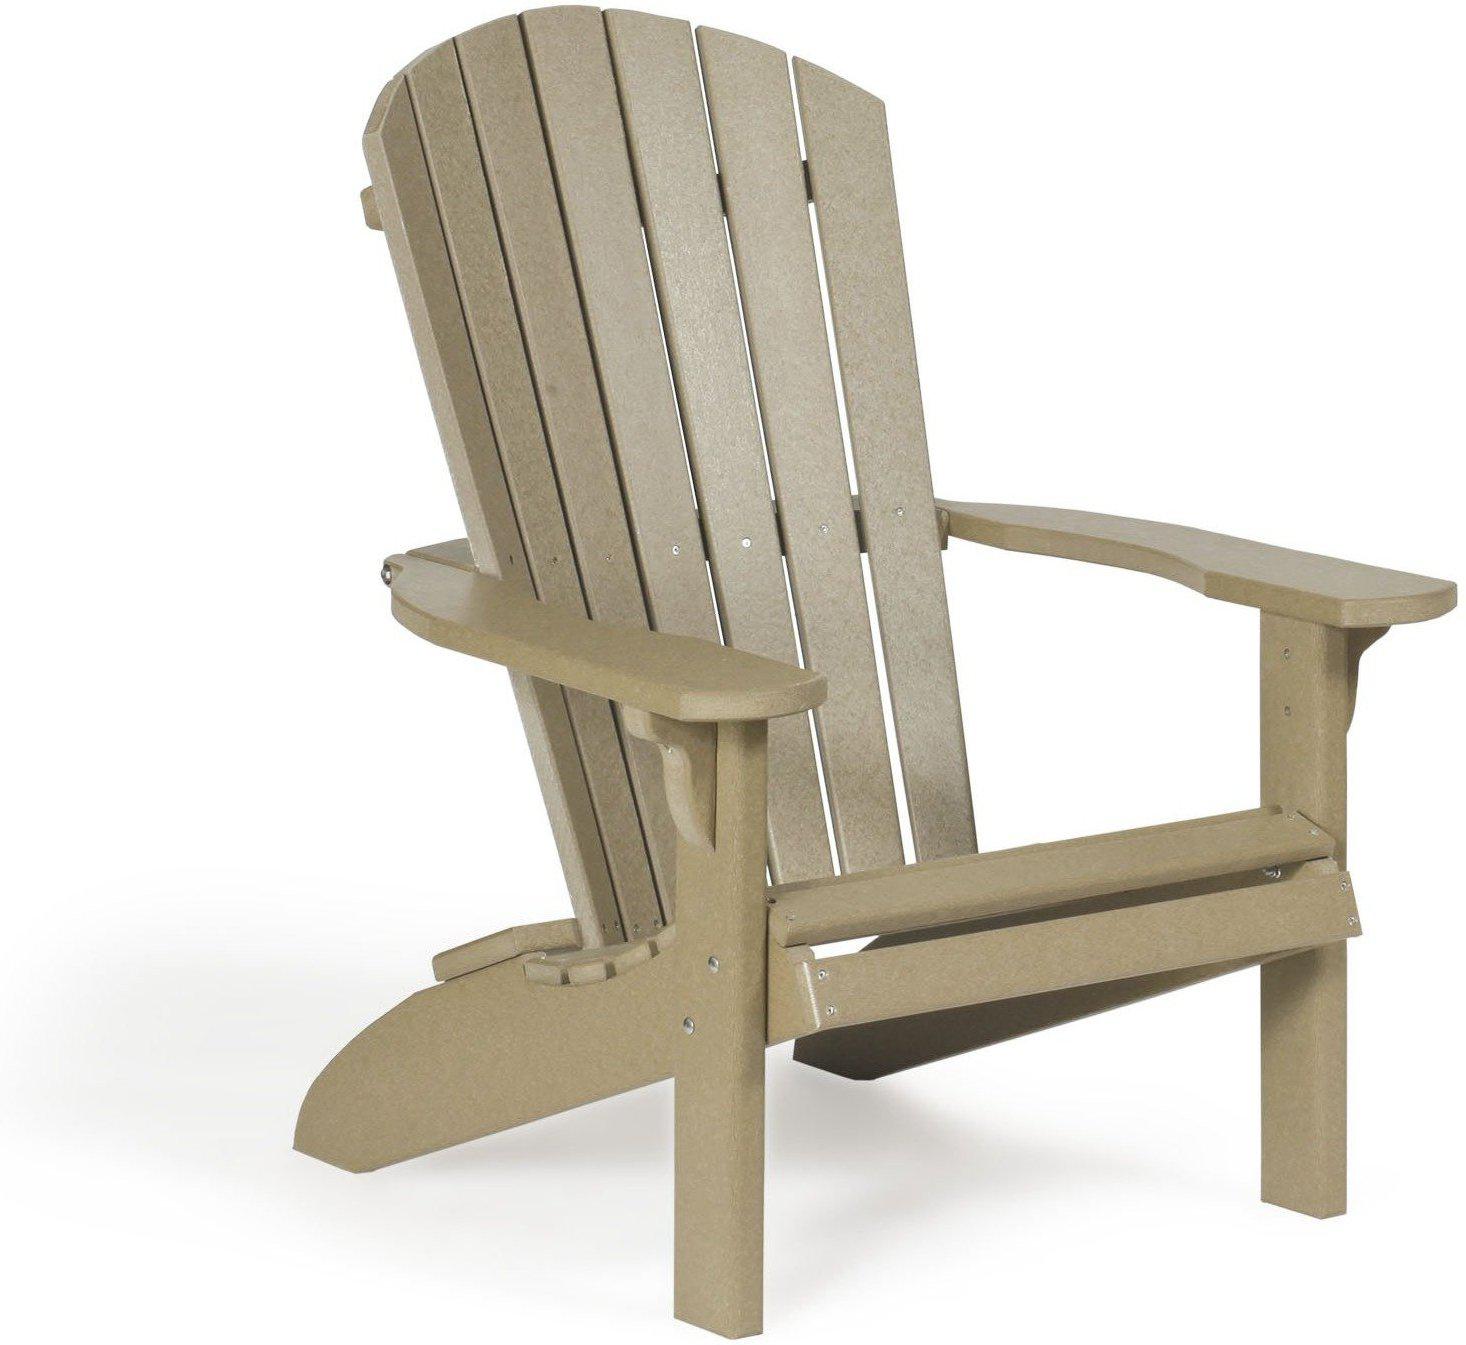 Leisure Lawns Adirondack Chair Collection